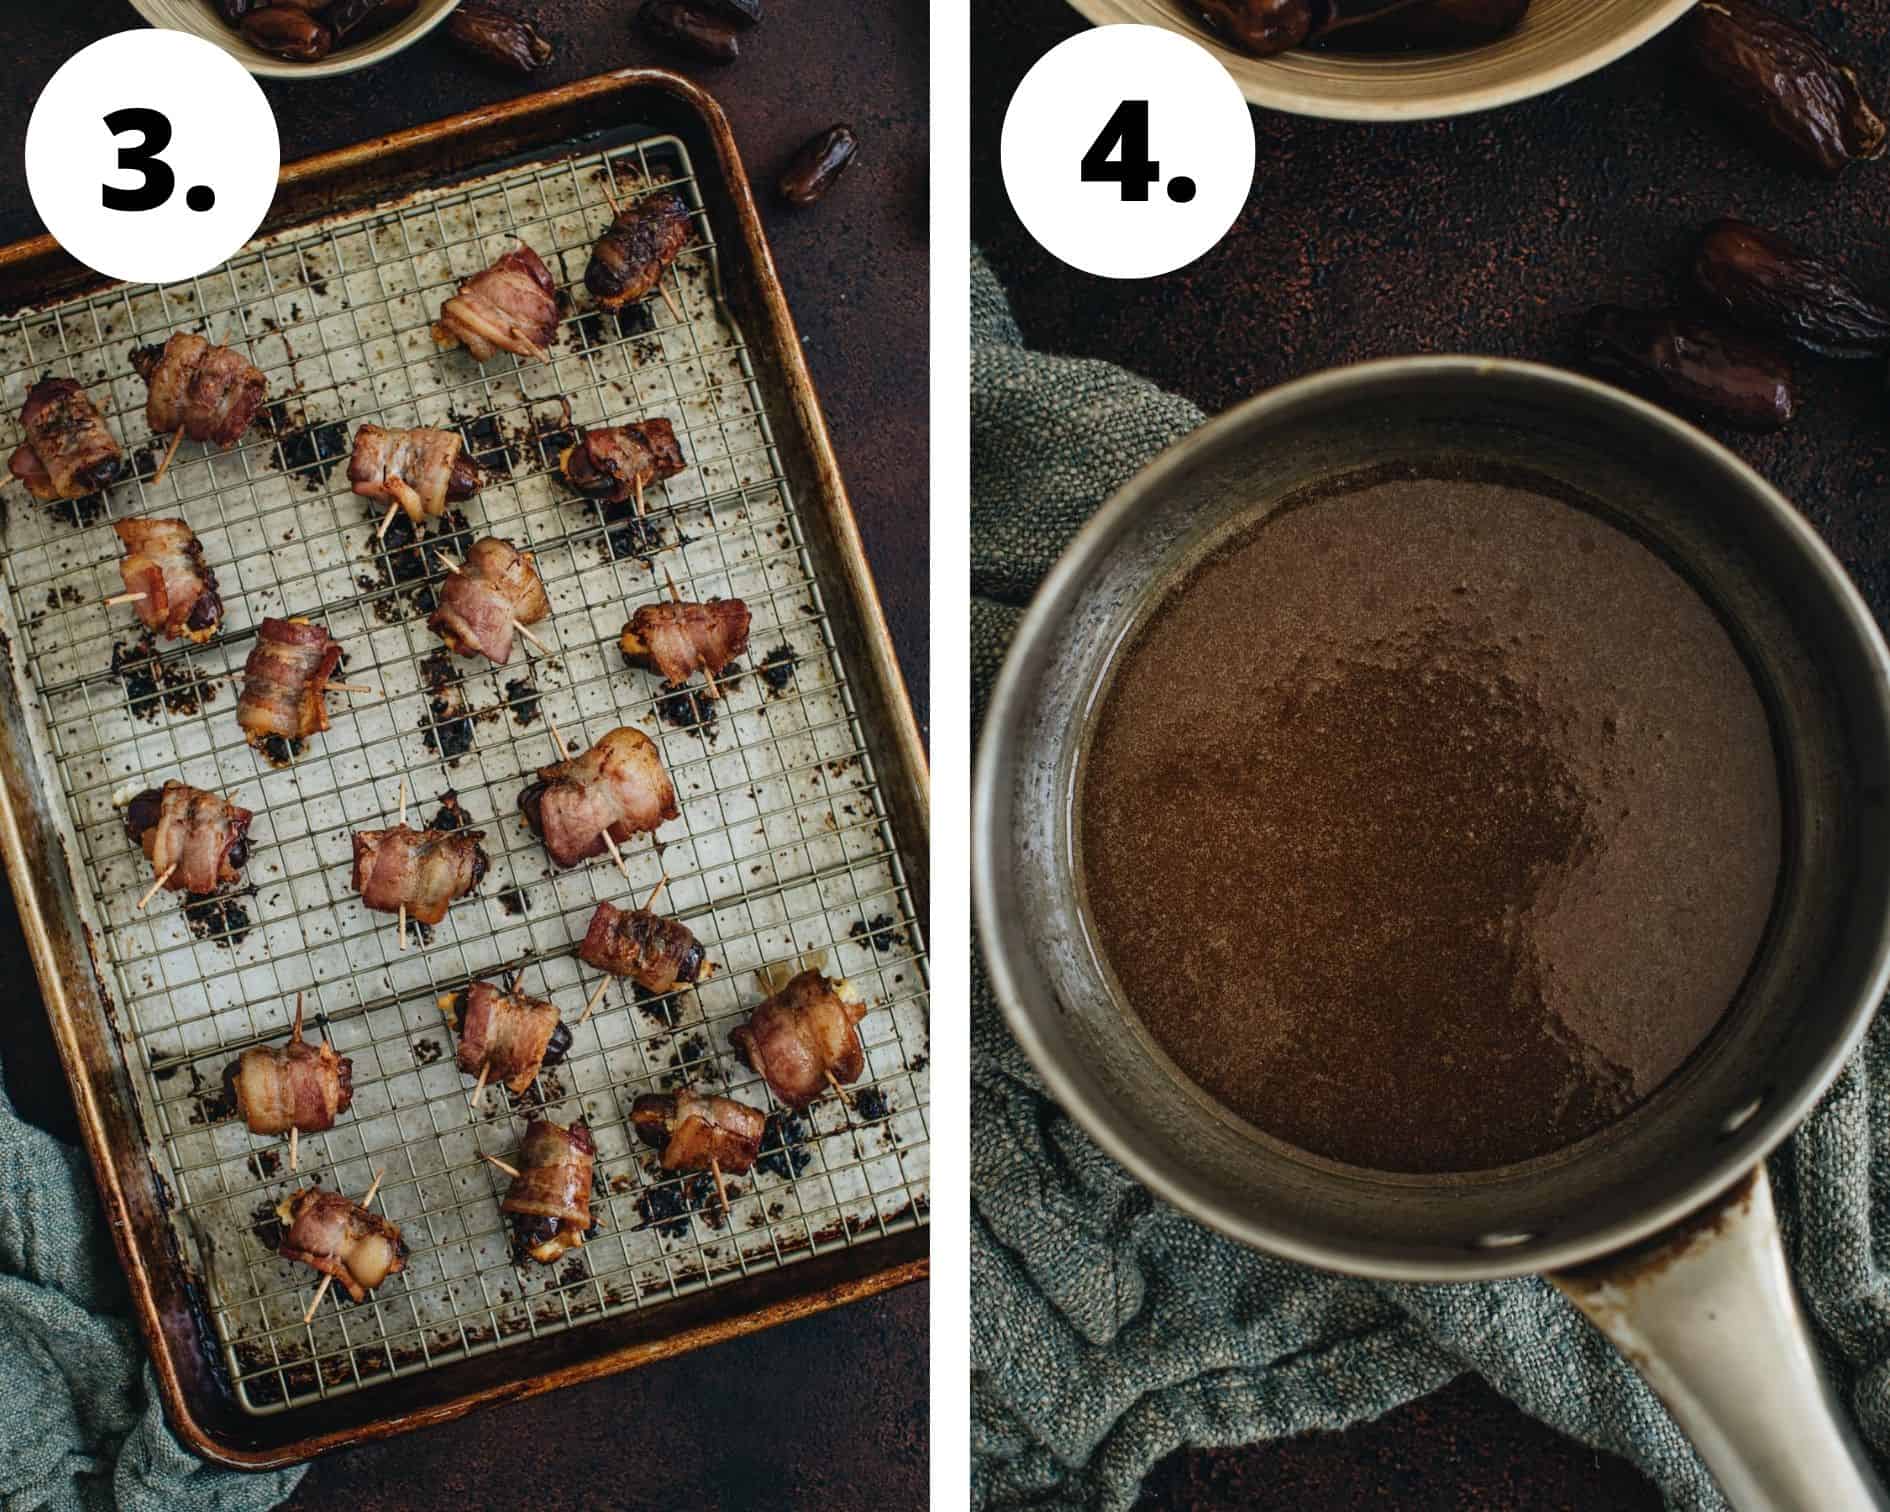 Goat cheese stuffed bacon wrapped dates process steps 3 and 4.